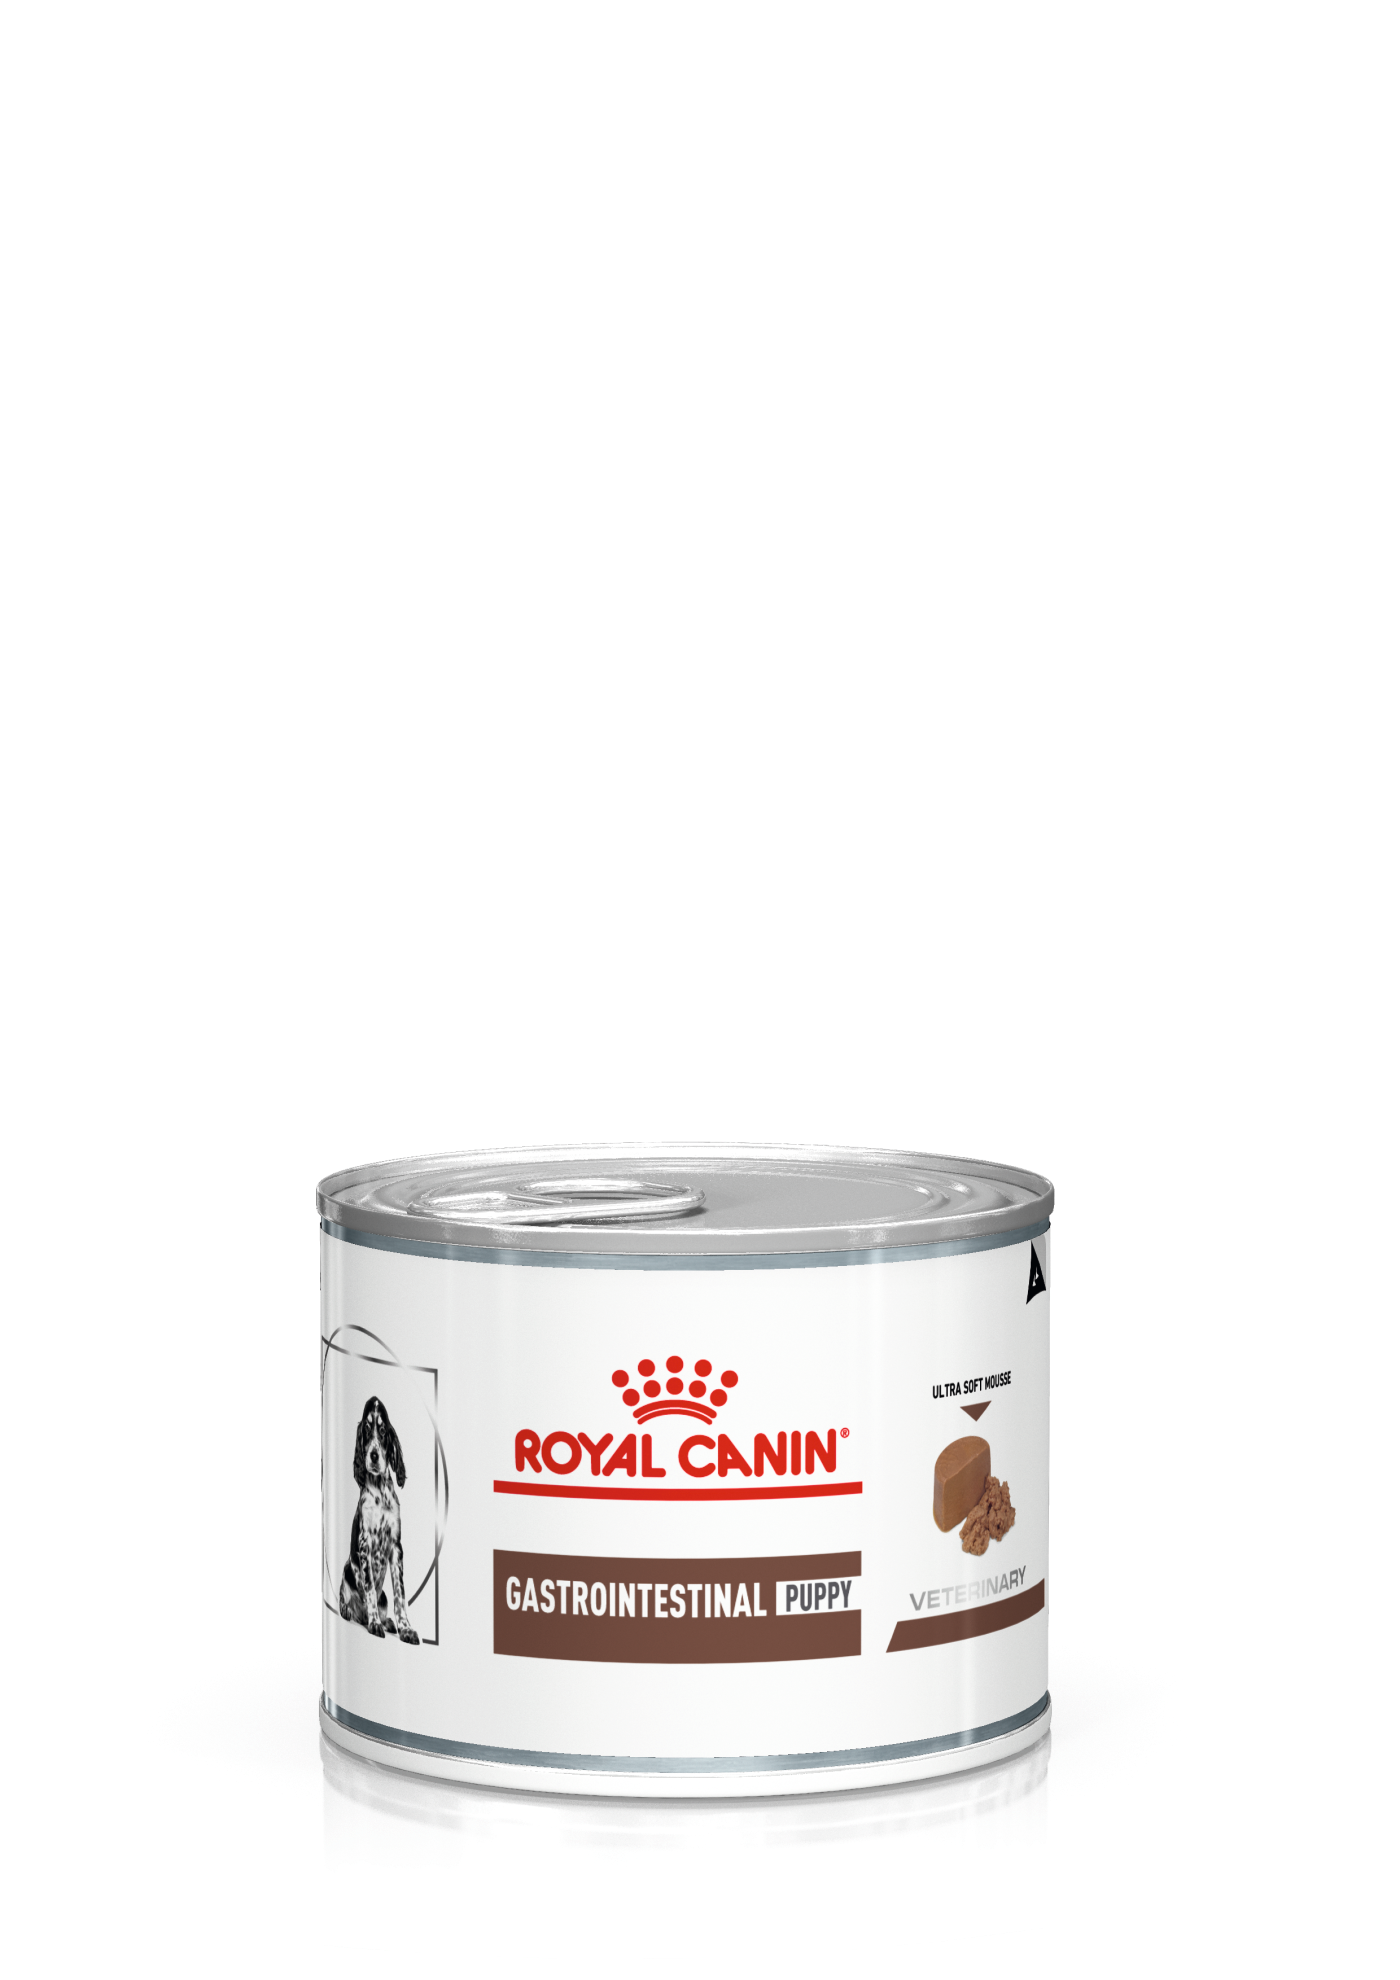 Gastrointestinal Puppy Ultra Soft Mousse